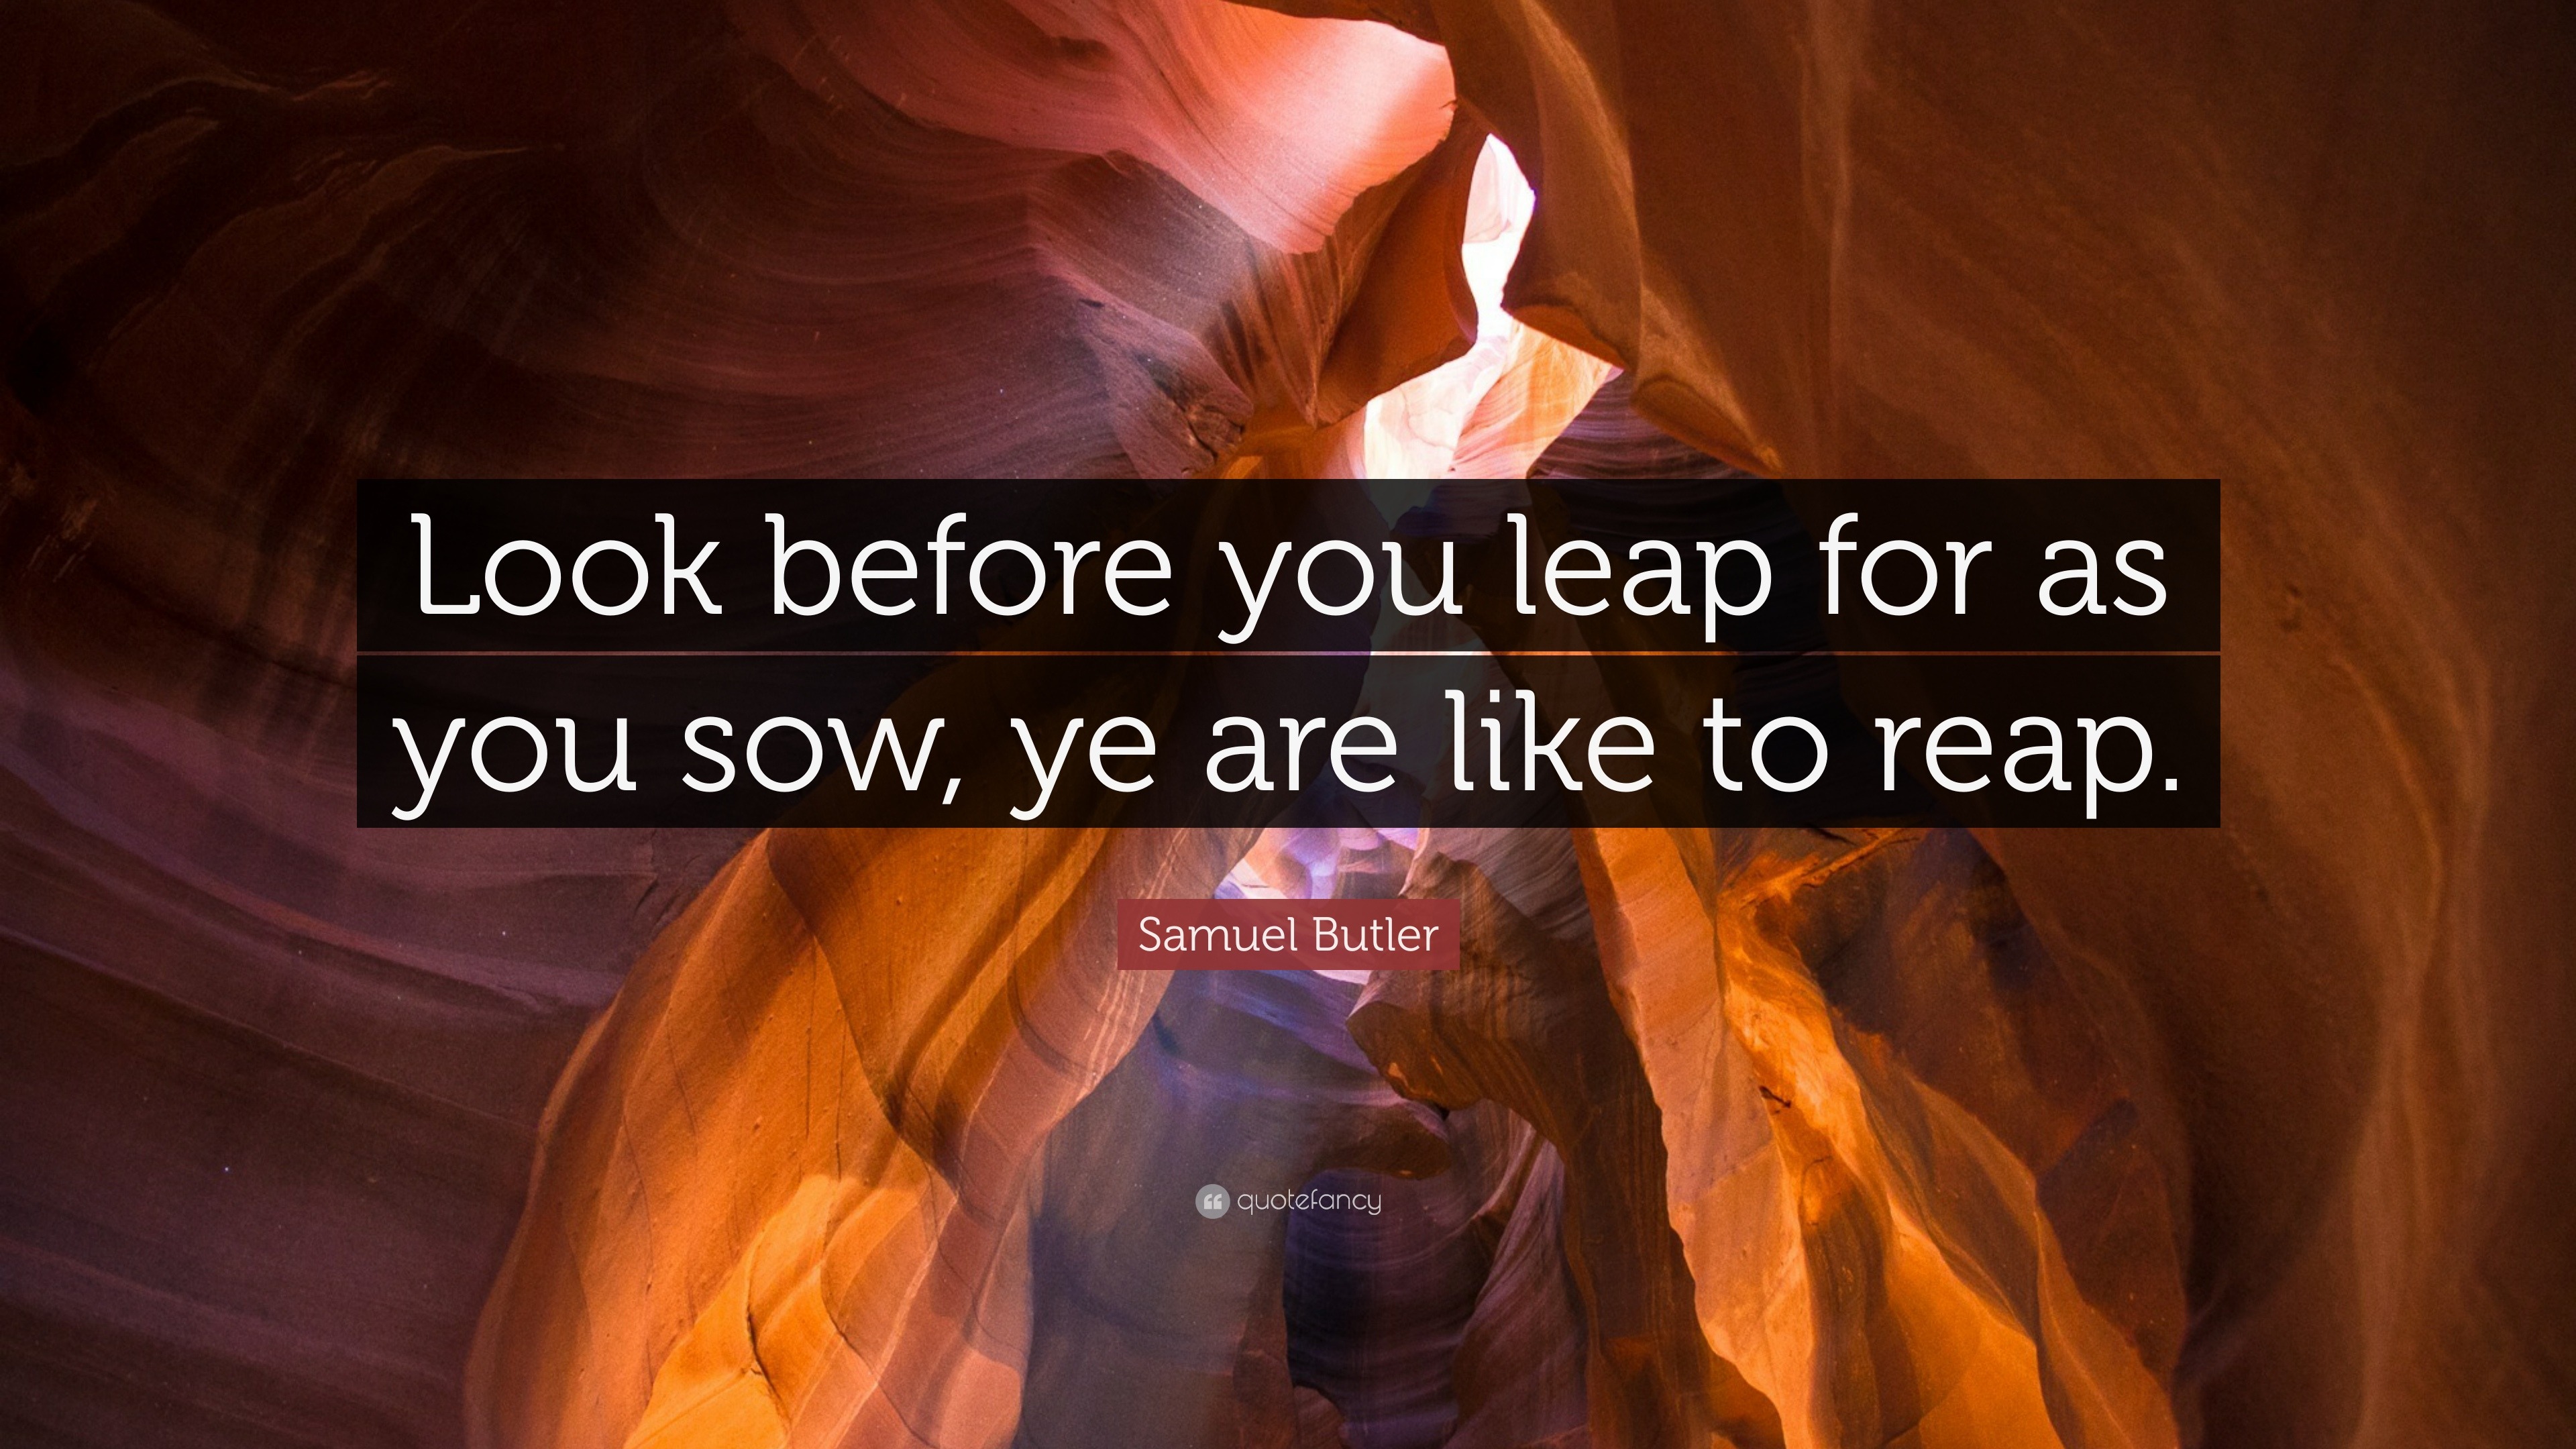 Samuel Butler Quote Look Before You Leap For As You Sow Ye Are Like To Reap